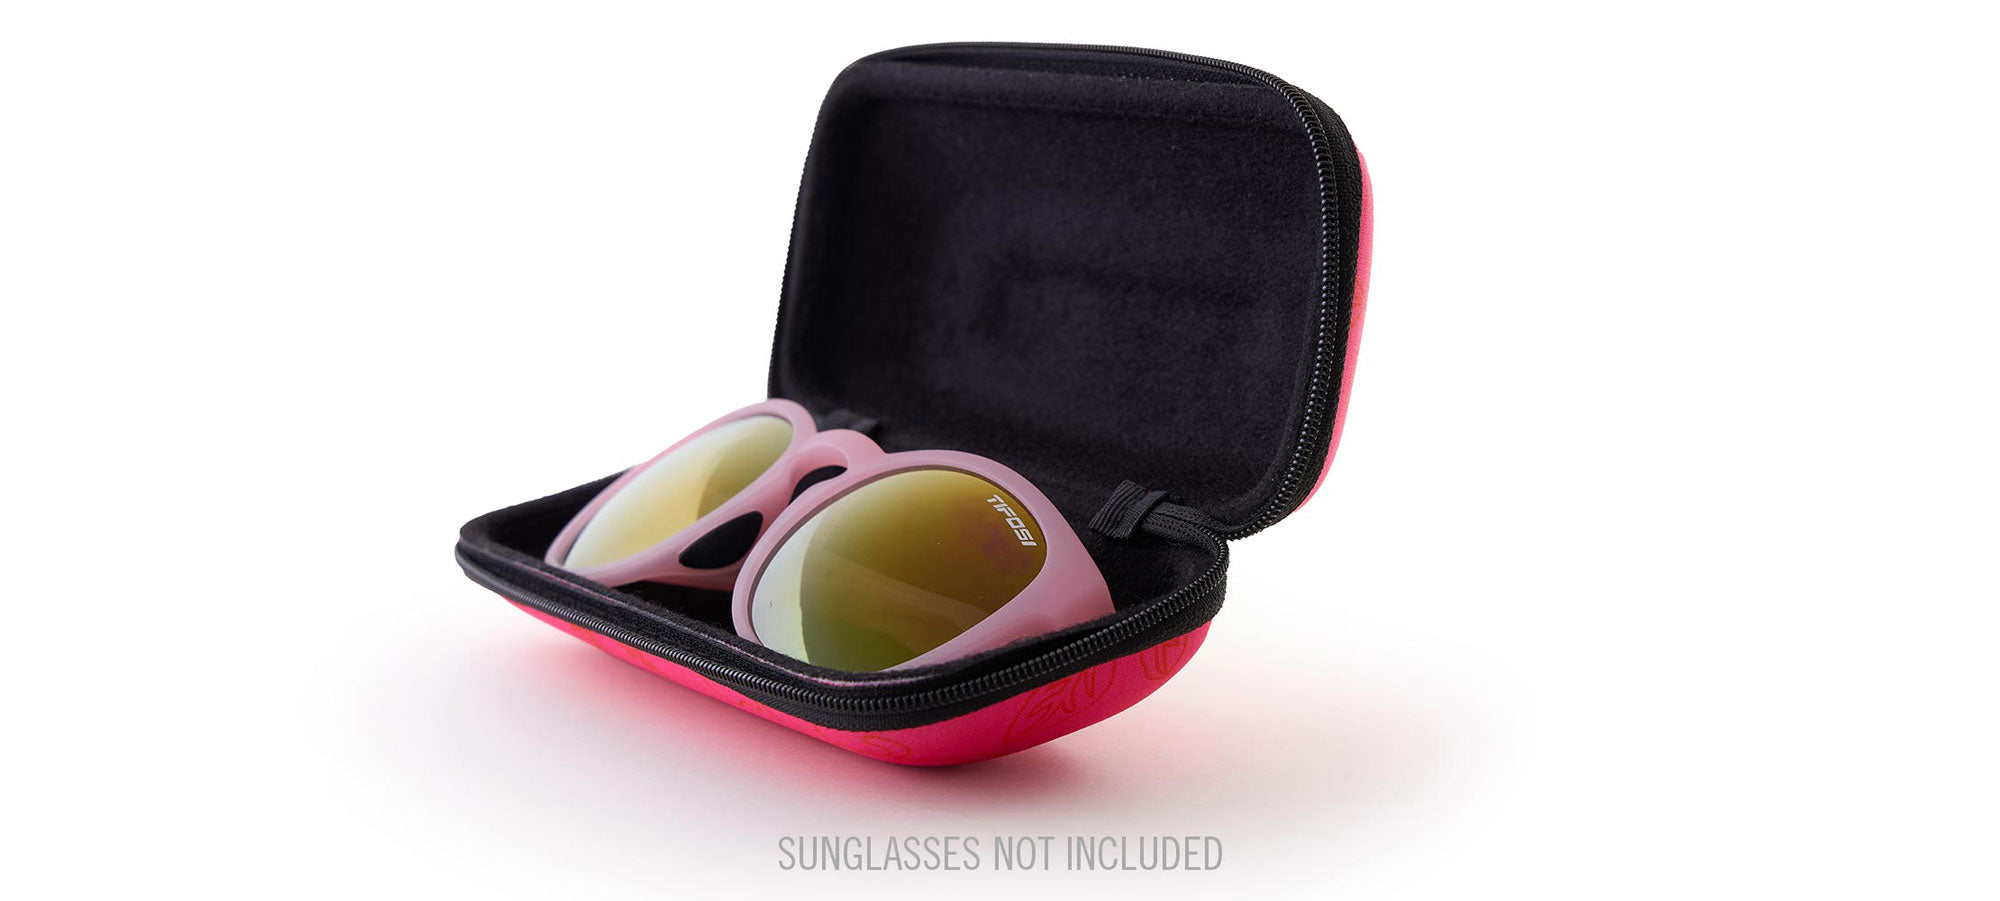 Open Sunglasses Holder with sample sunglasses (not included)